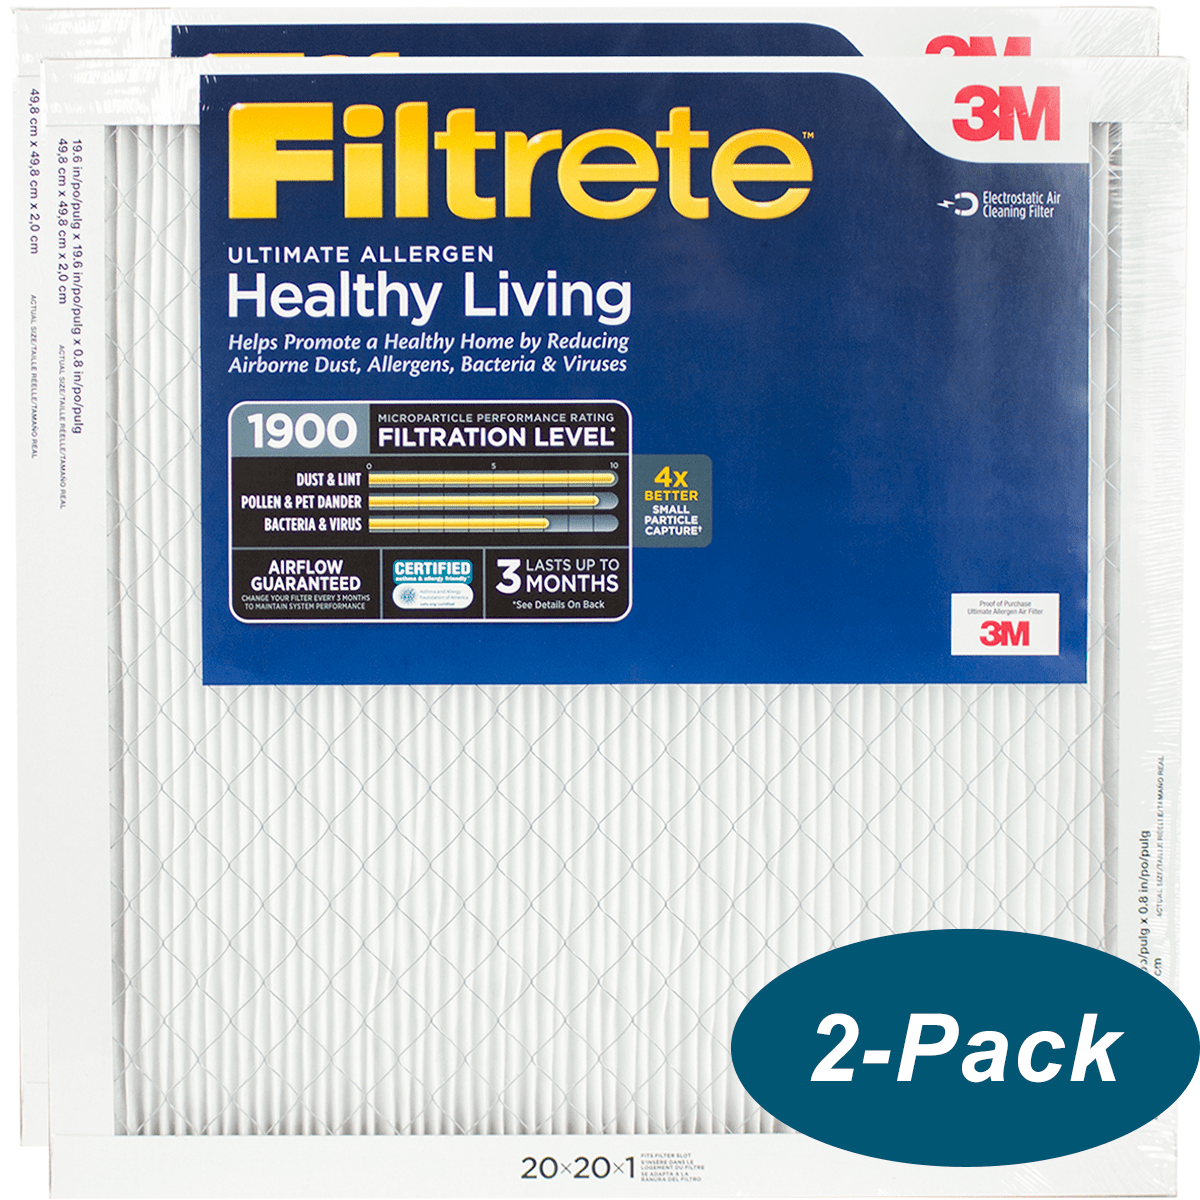 3M Filtrete Healthy Living 1900 MPR Ultimate Allergen Reduction Filters 20x20x1 2-PACK